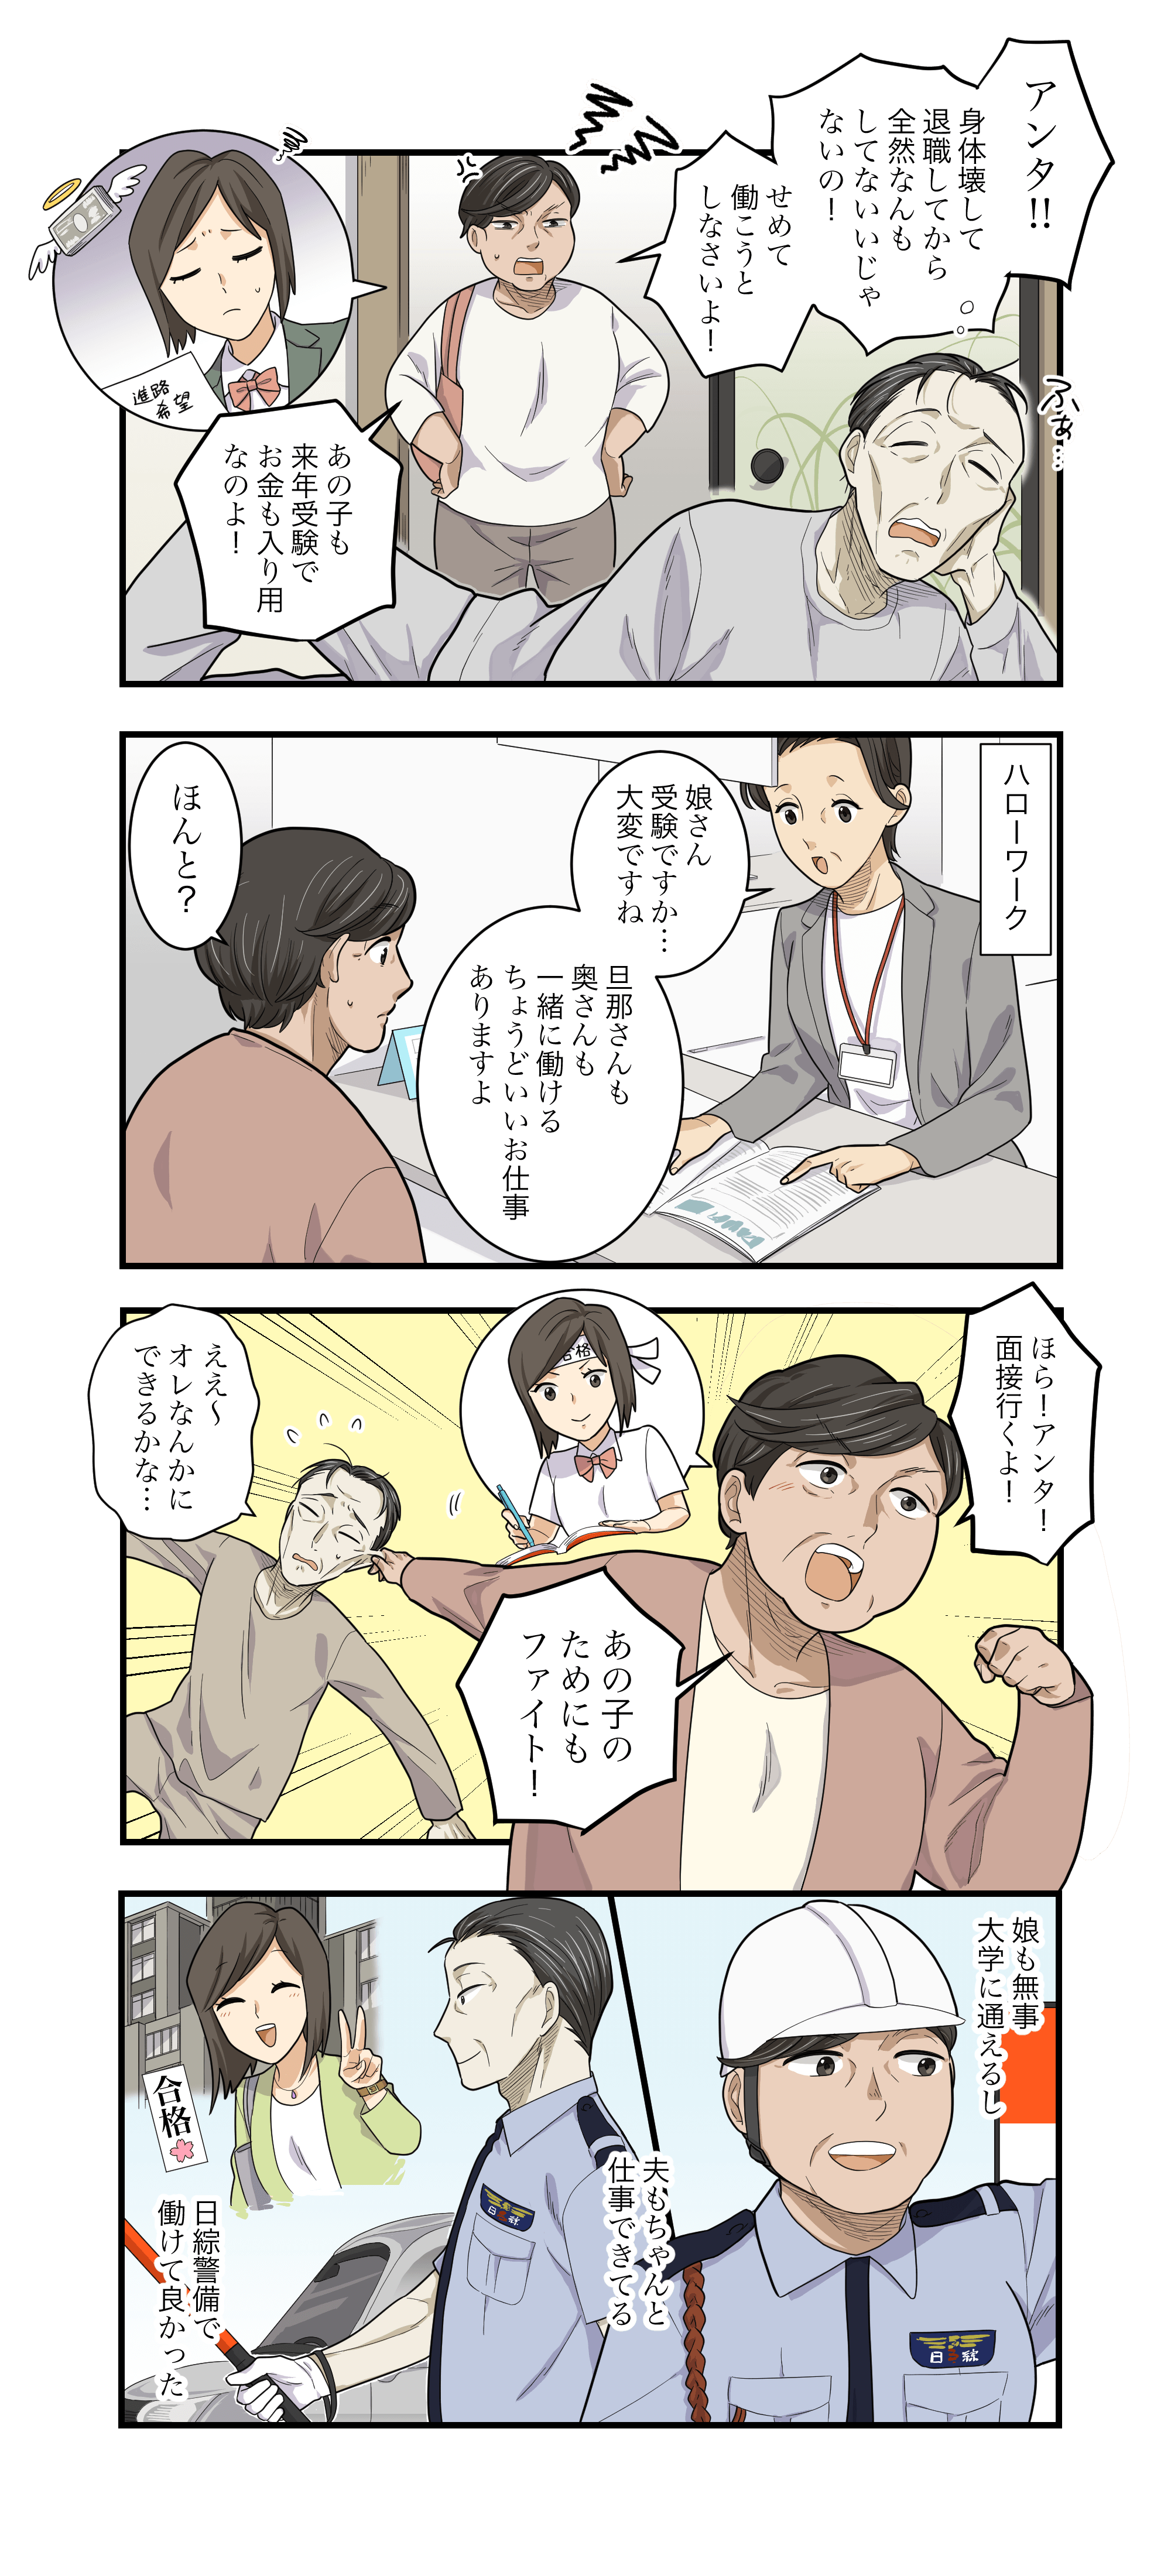 Another Story 漫画